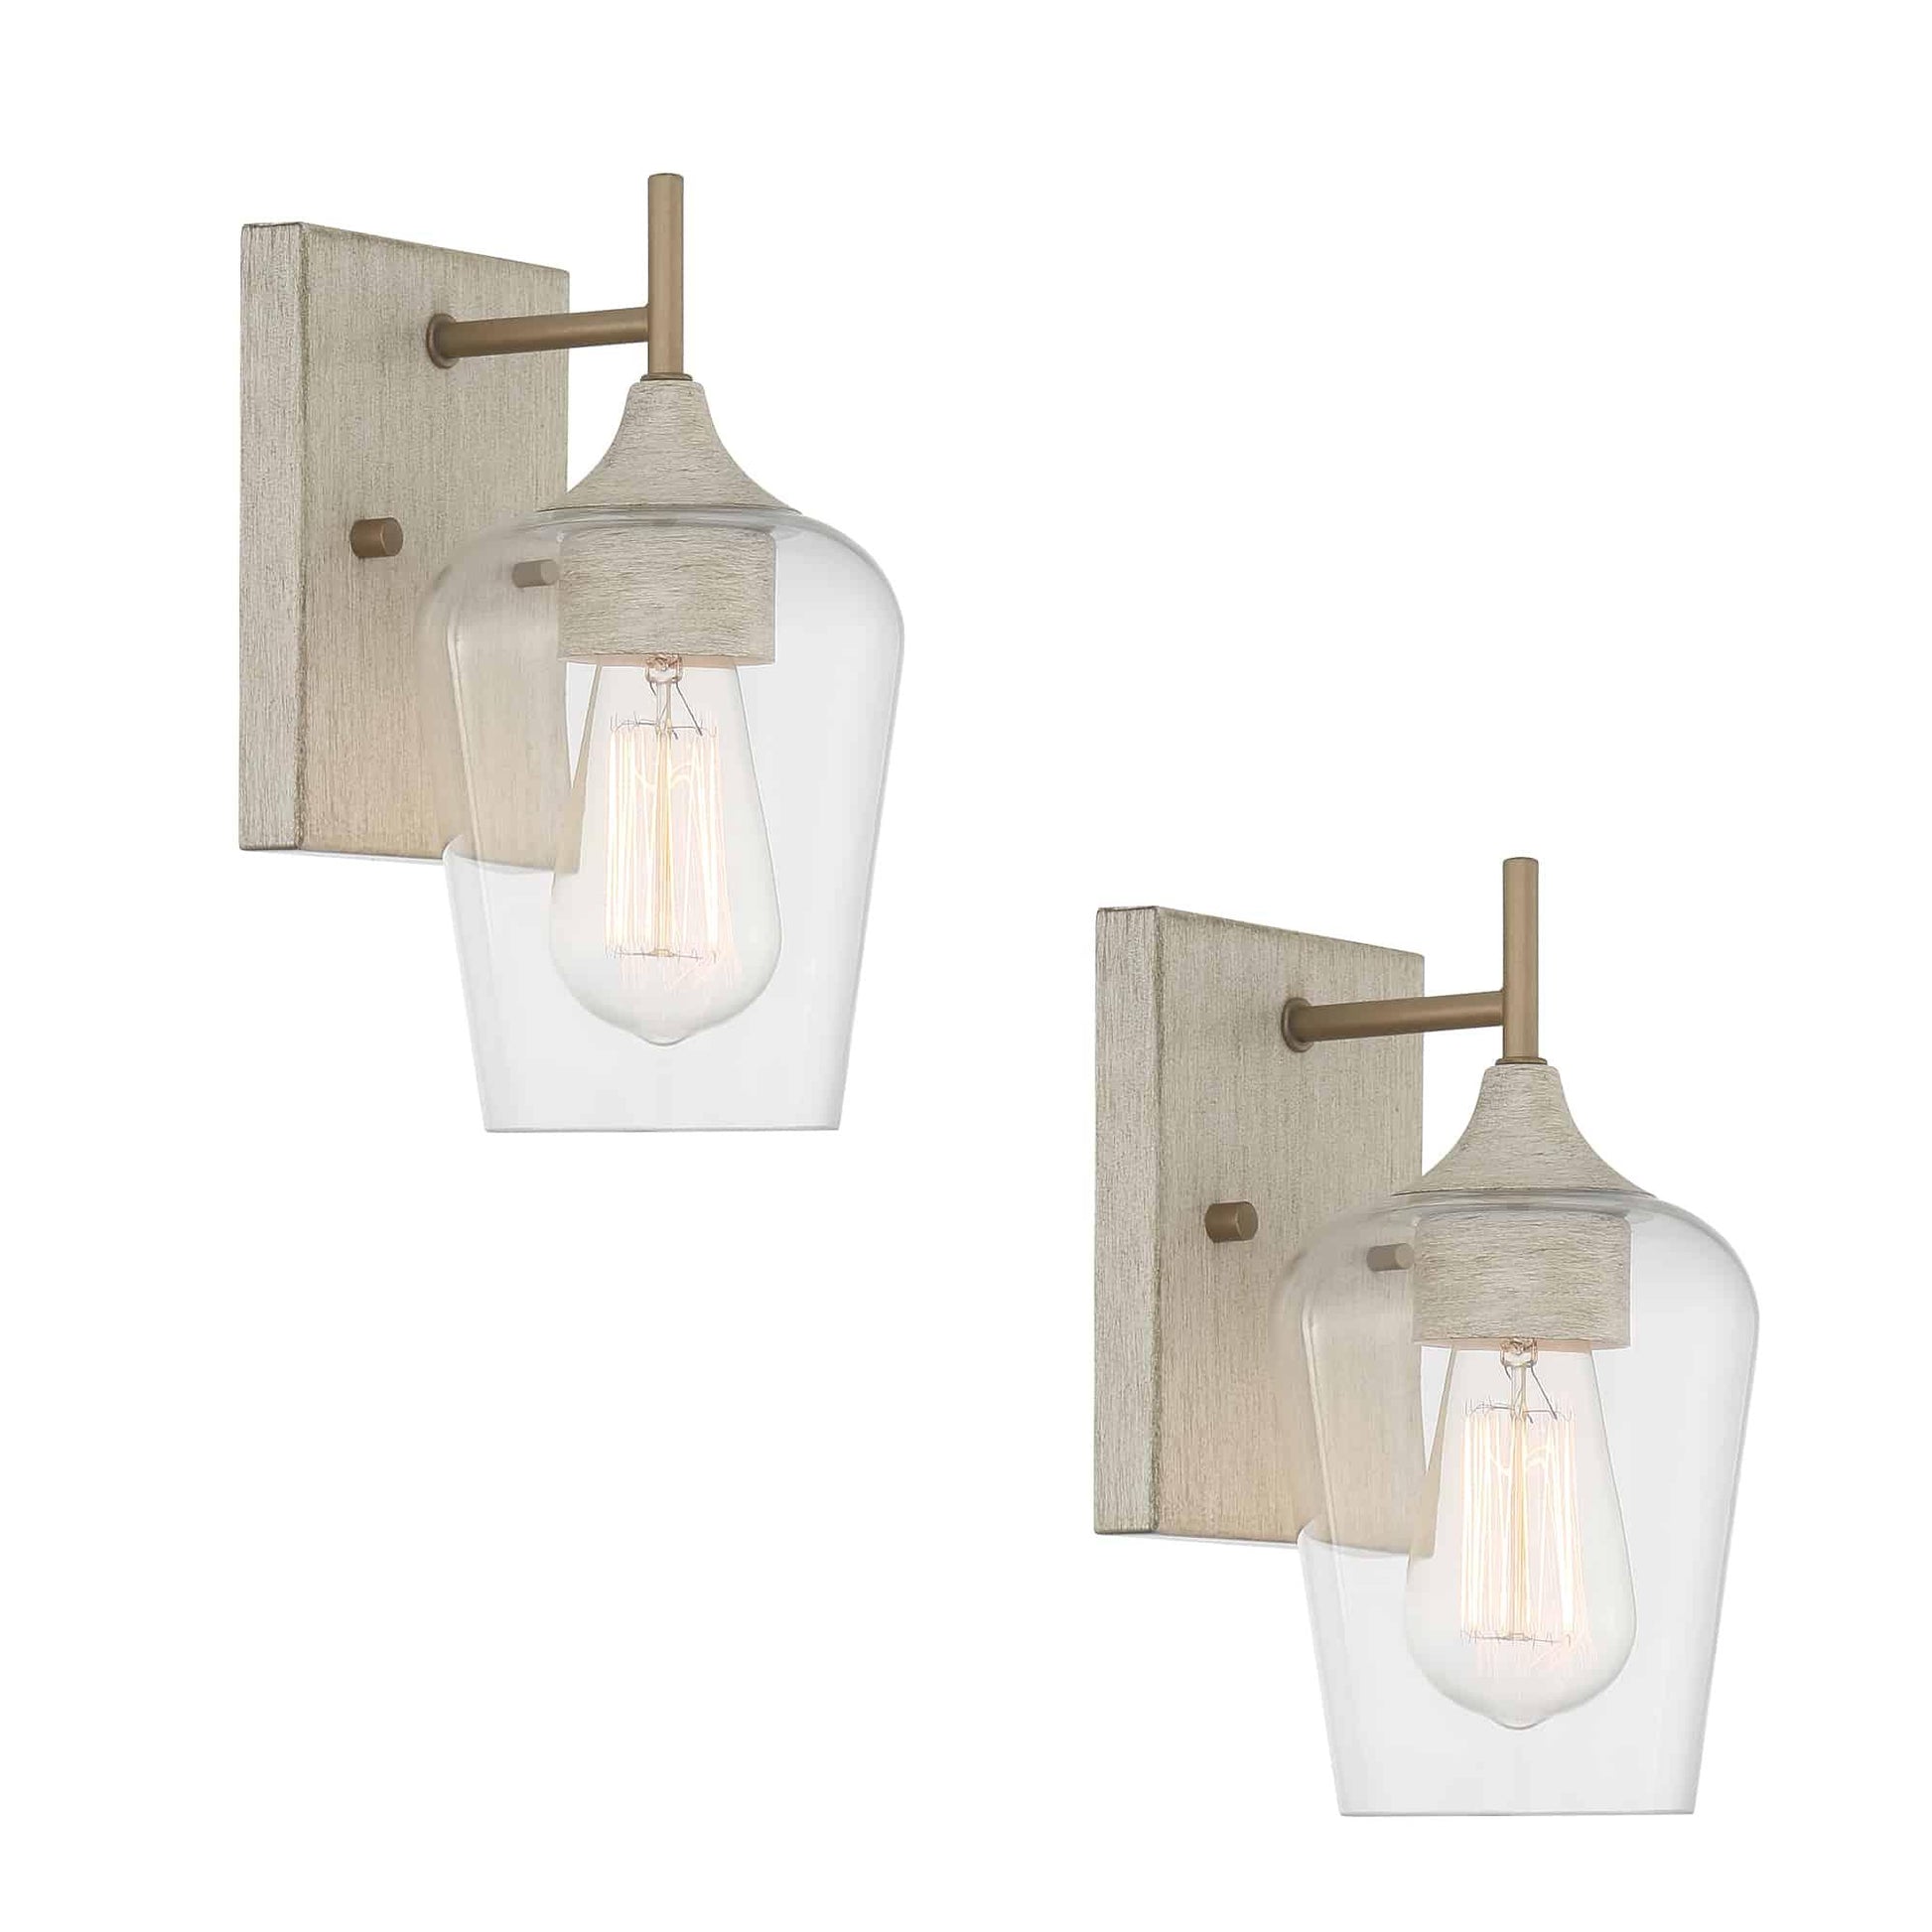 1 light glass wall sconce set of 2 (46) by ACROMA